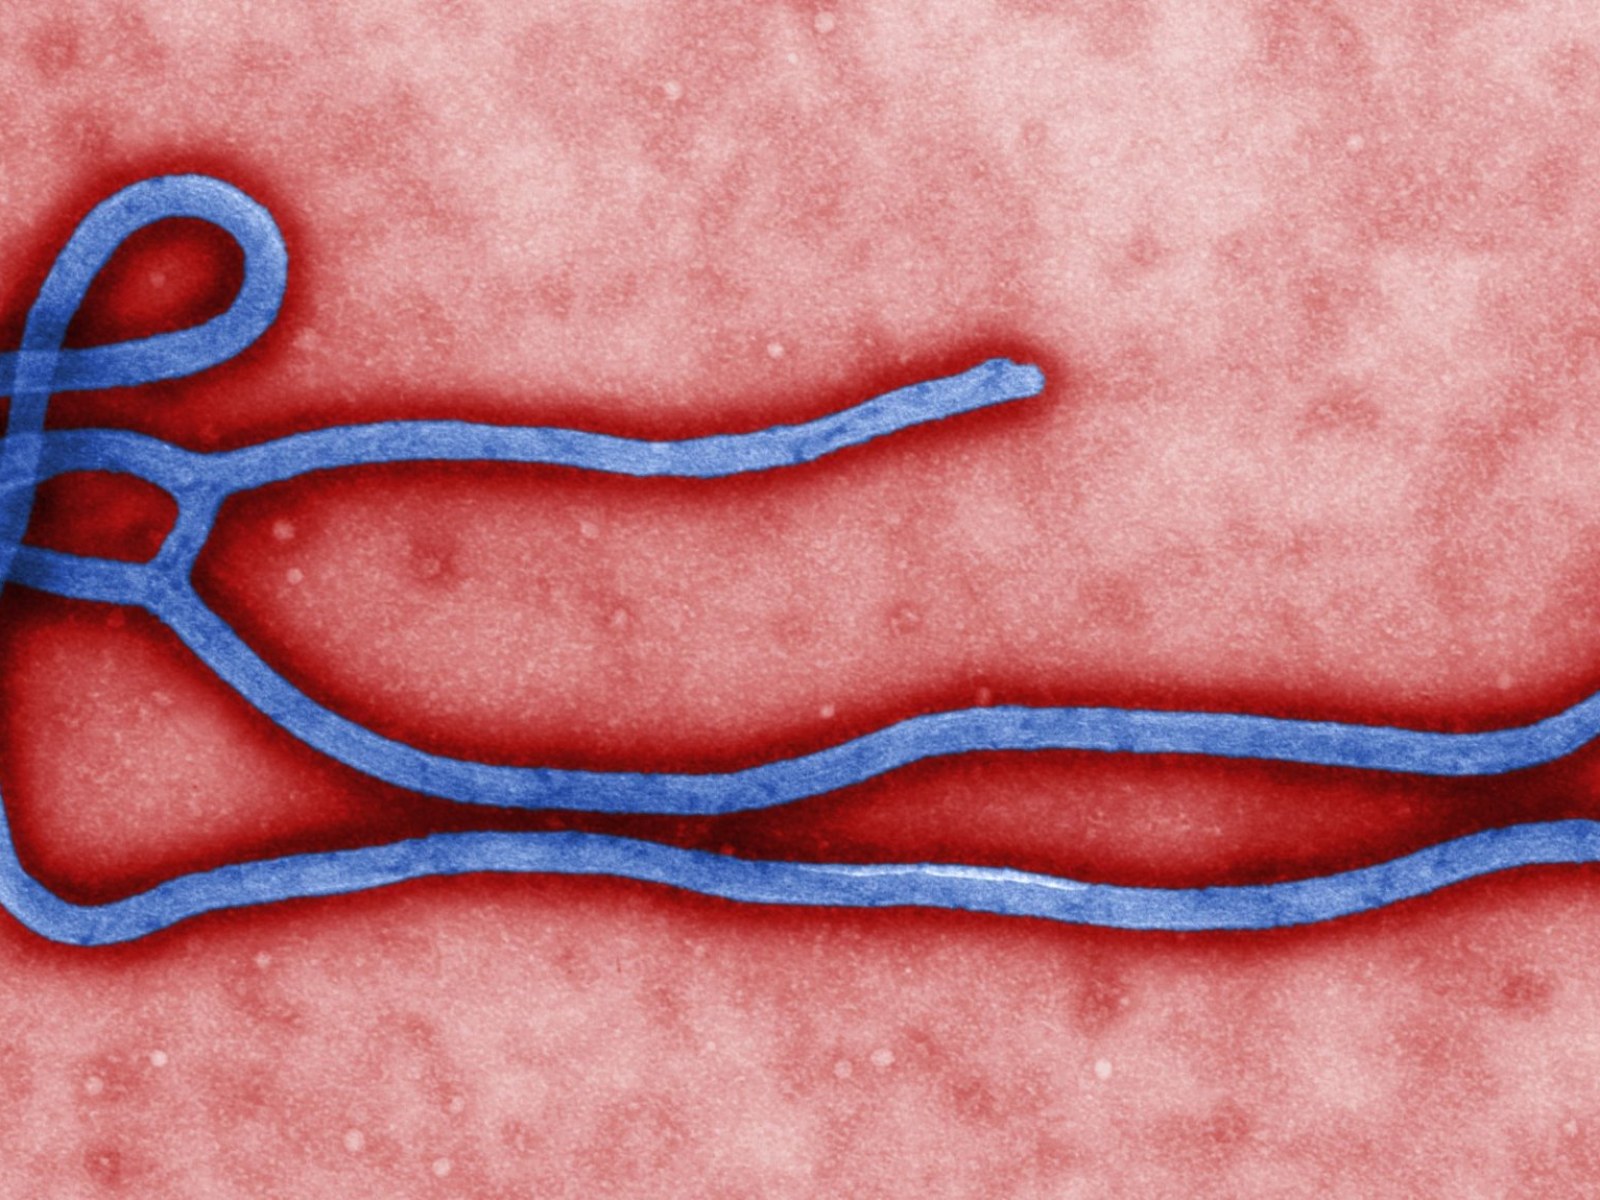 How Ebola Kills: What The Deadly Virus Does To The Human Body